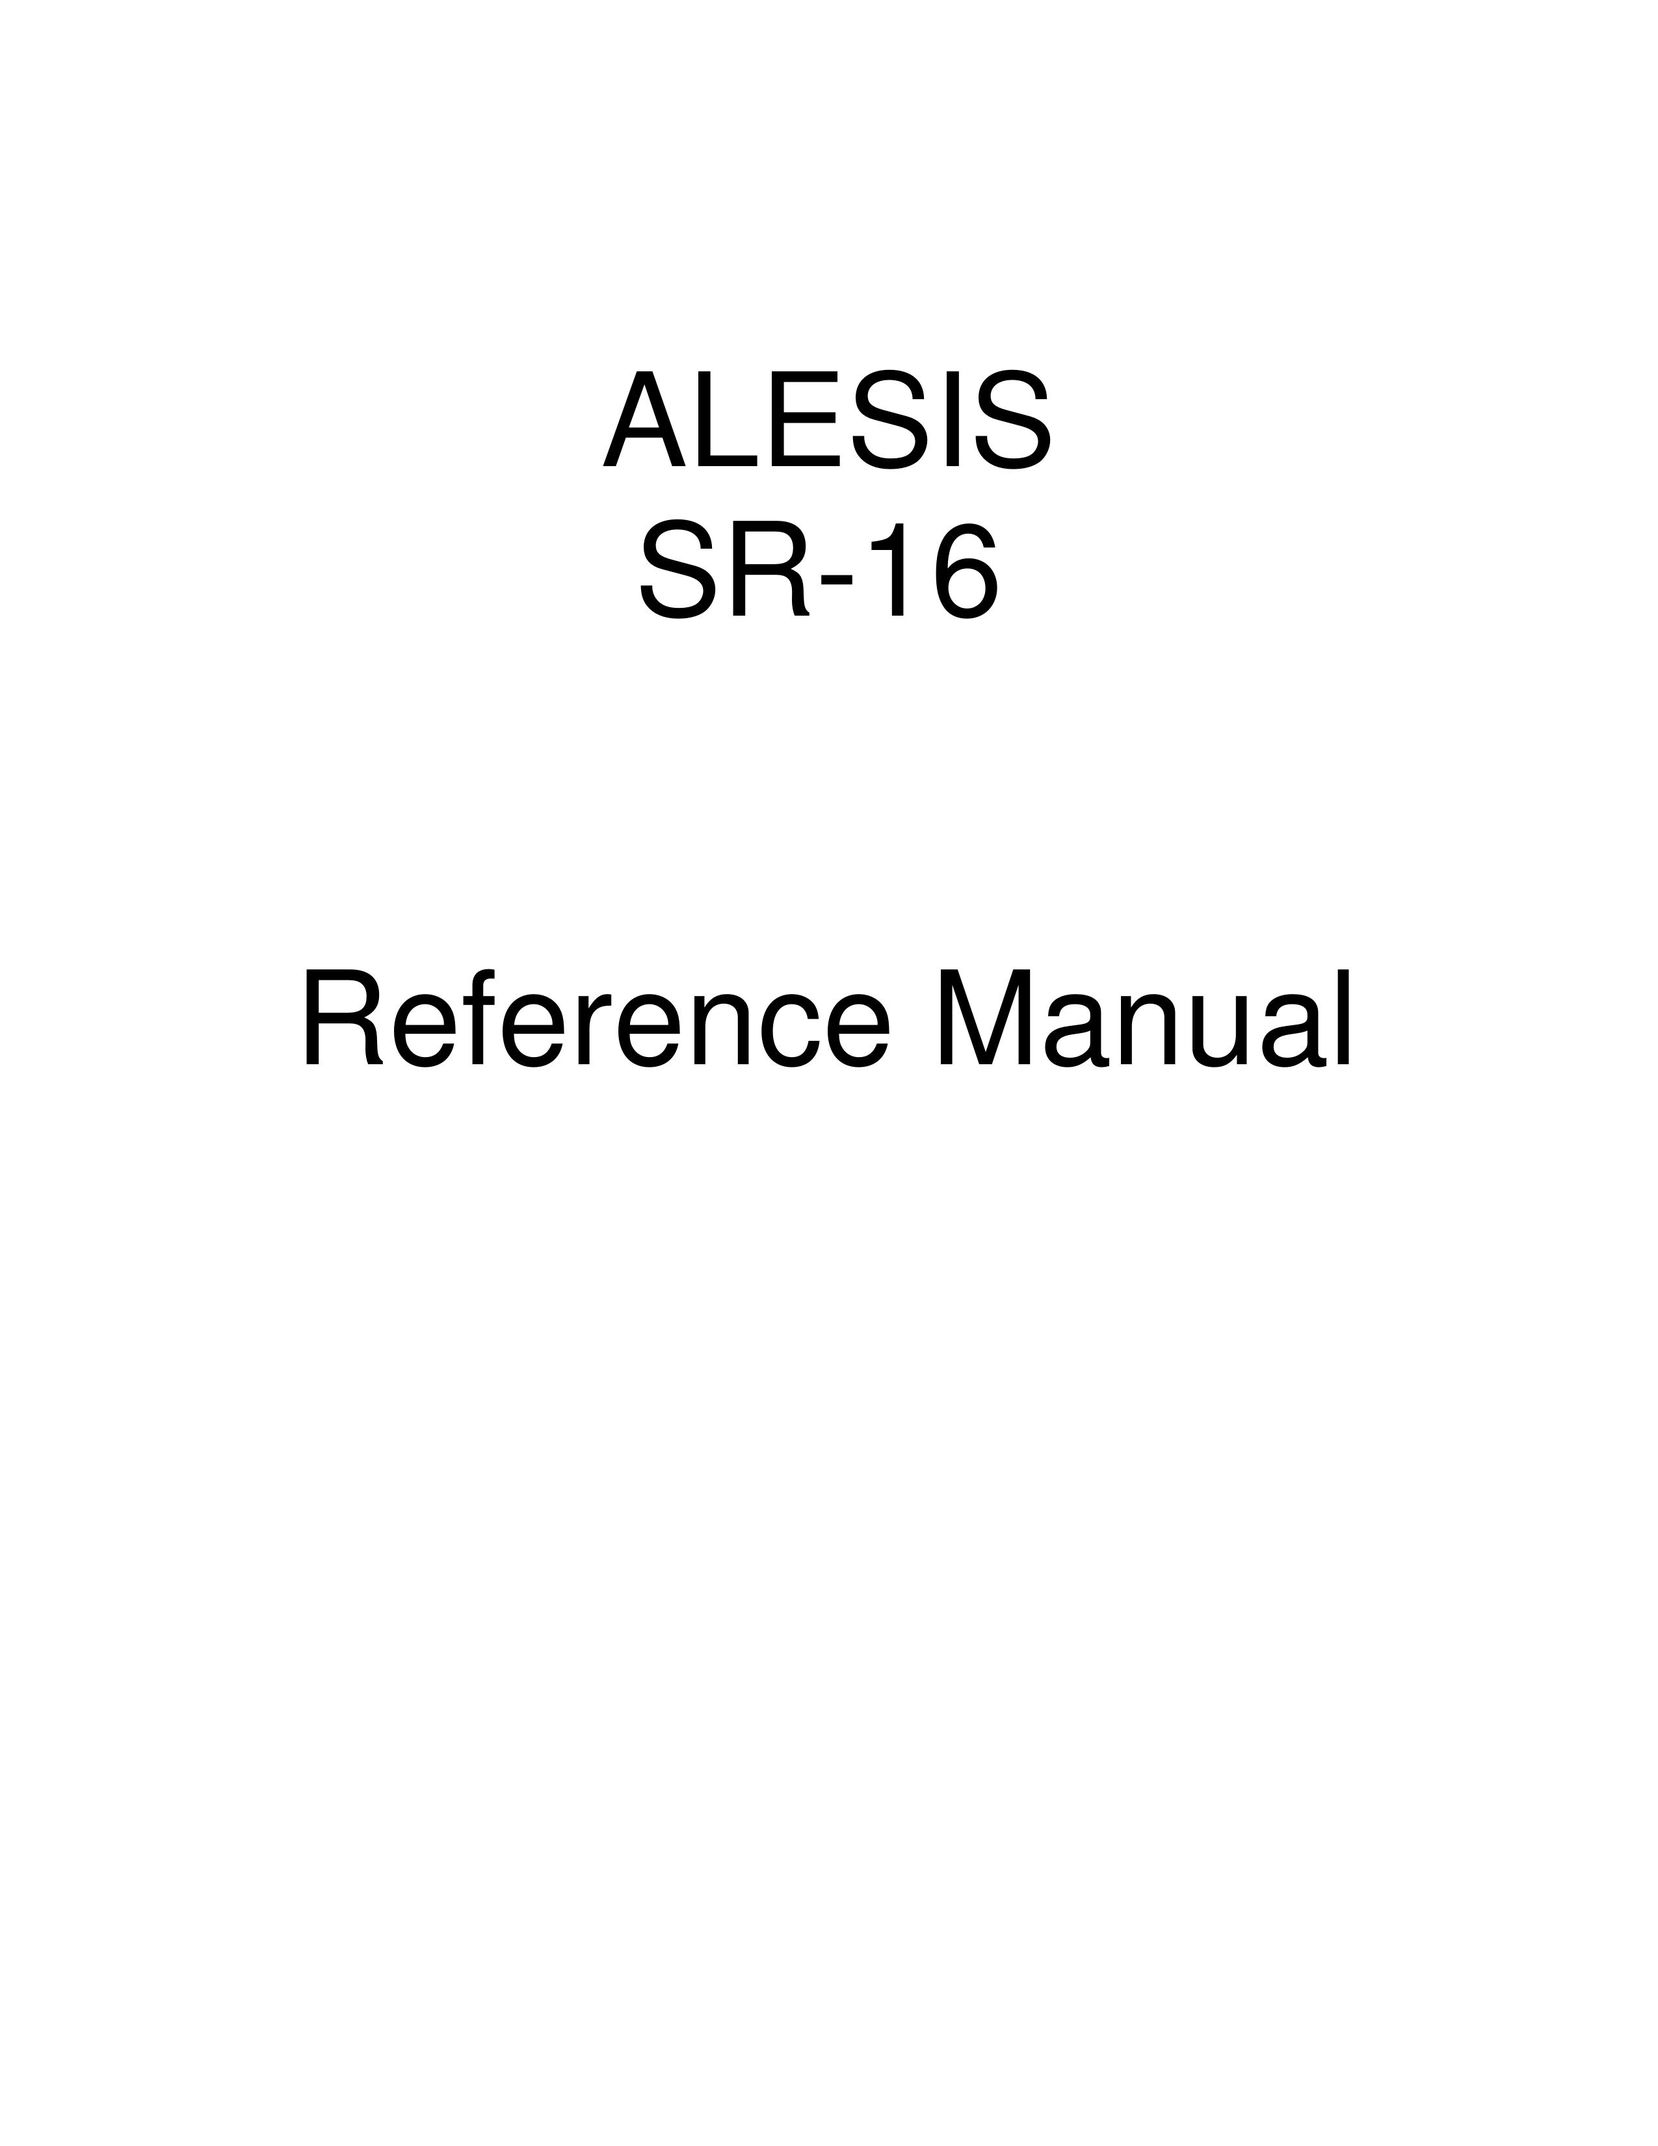 Alesis SR-16 Projection Television User Manual